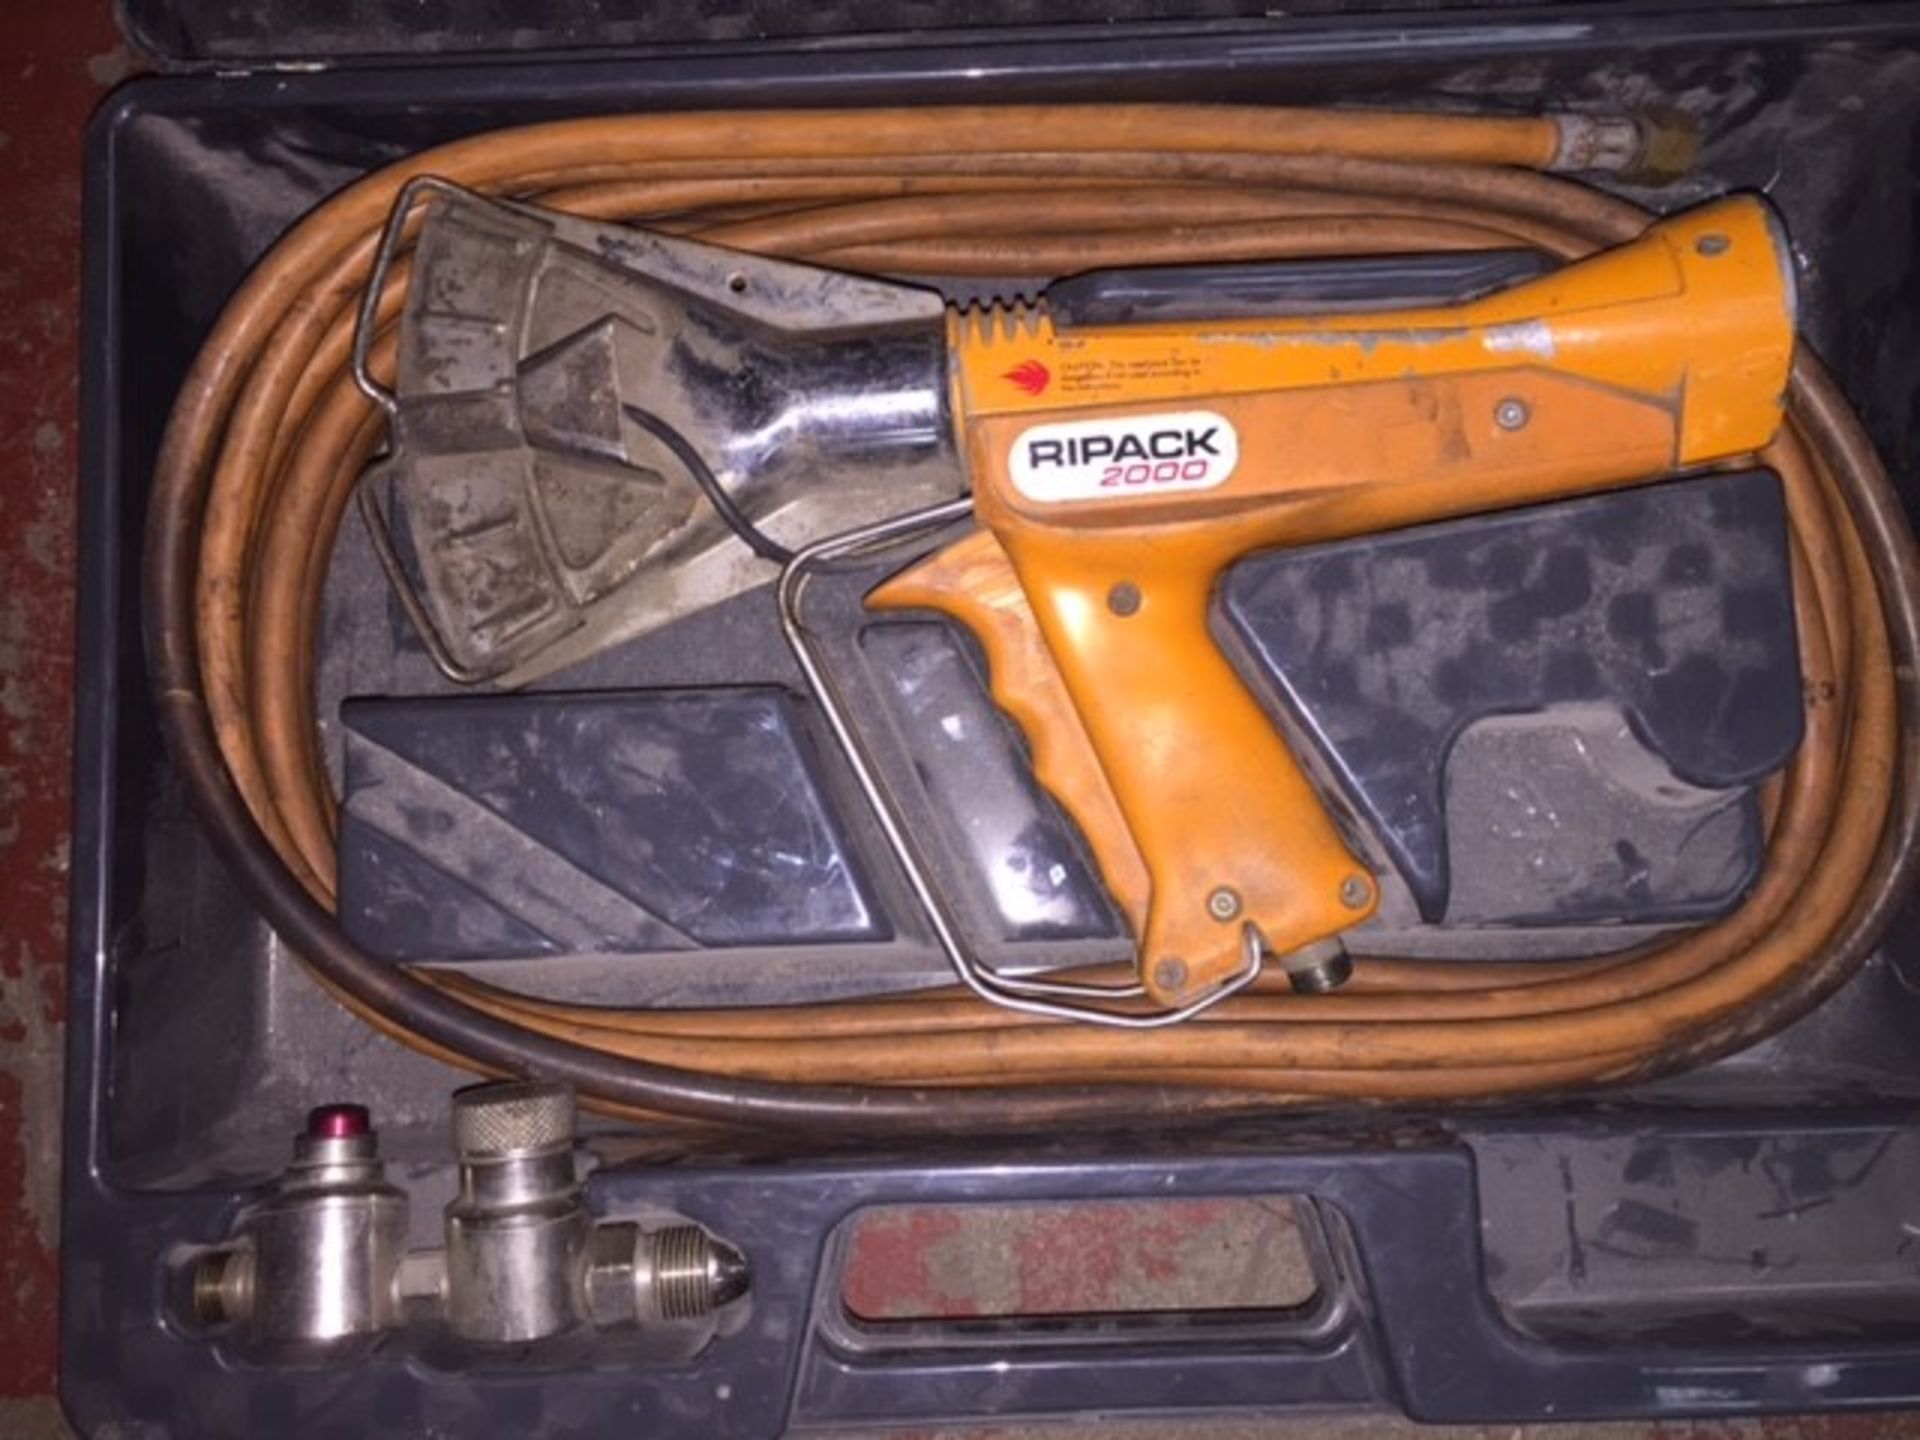 * Two Ripack 2000 Hot Air Guns. Used for Propane Gas Shrink Wrapping. - Image 2 of 3